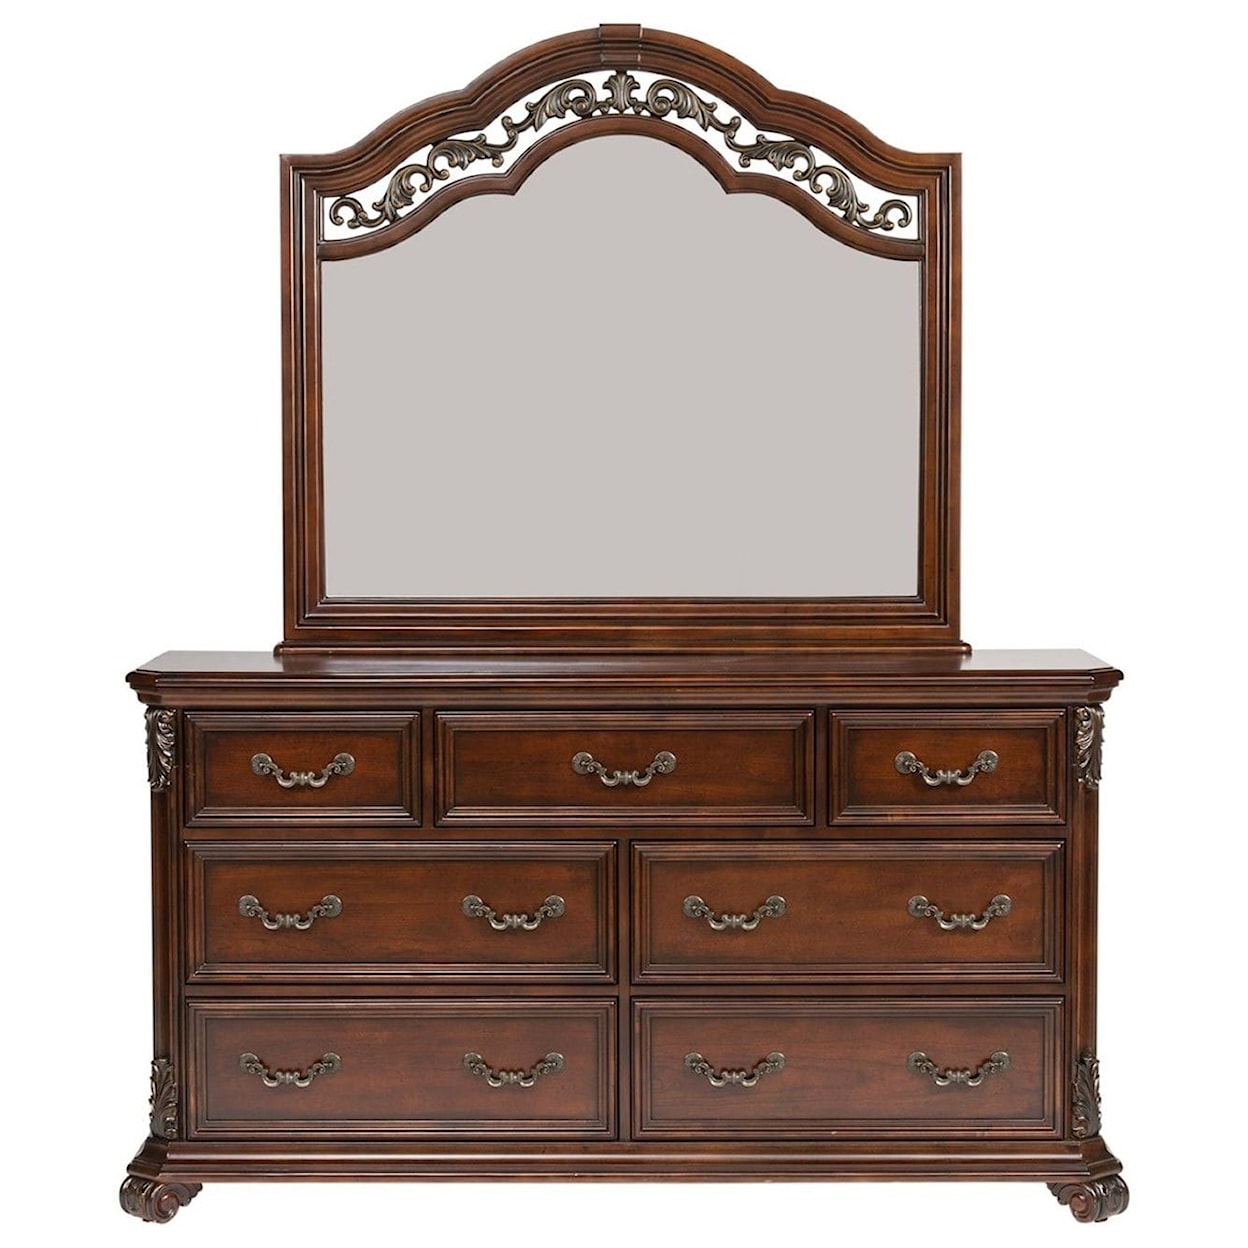 Liberty Furniture Messina Estates Bedroom 7-Drawer Dresser with Arched Mirror